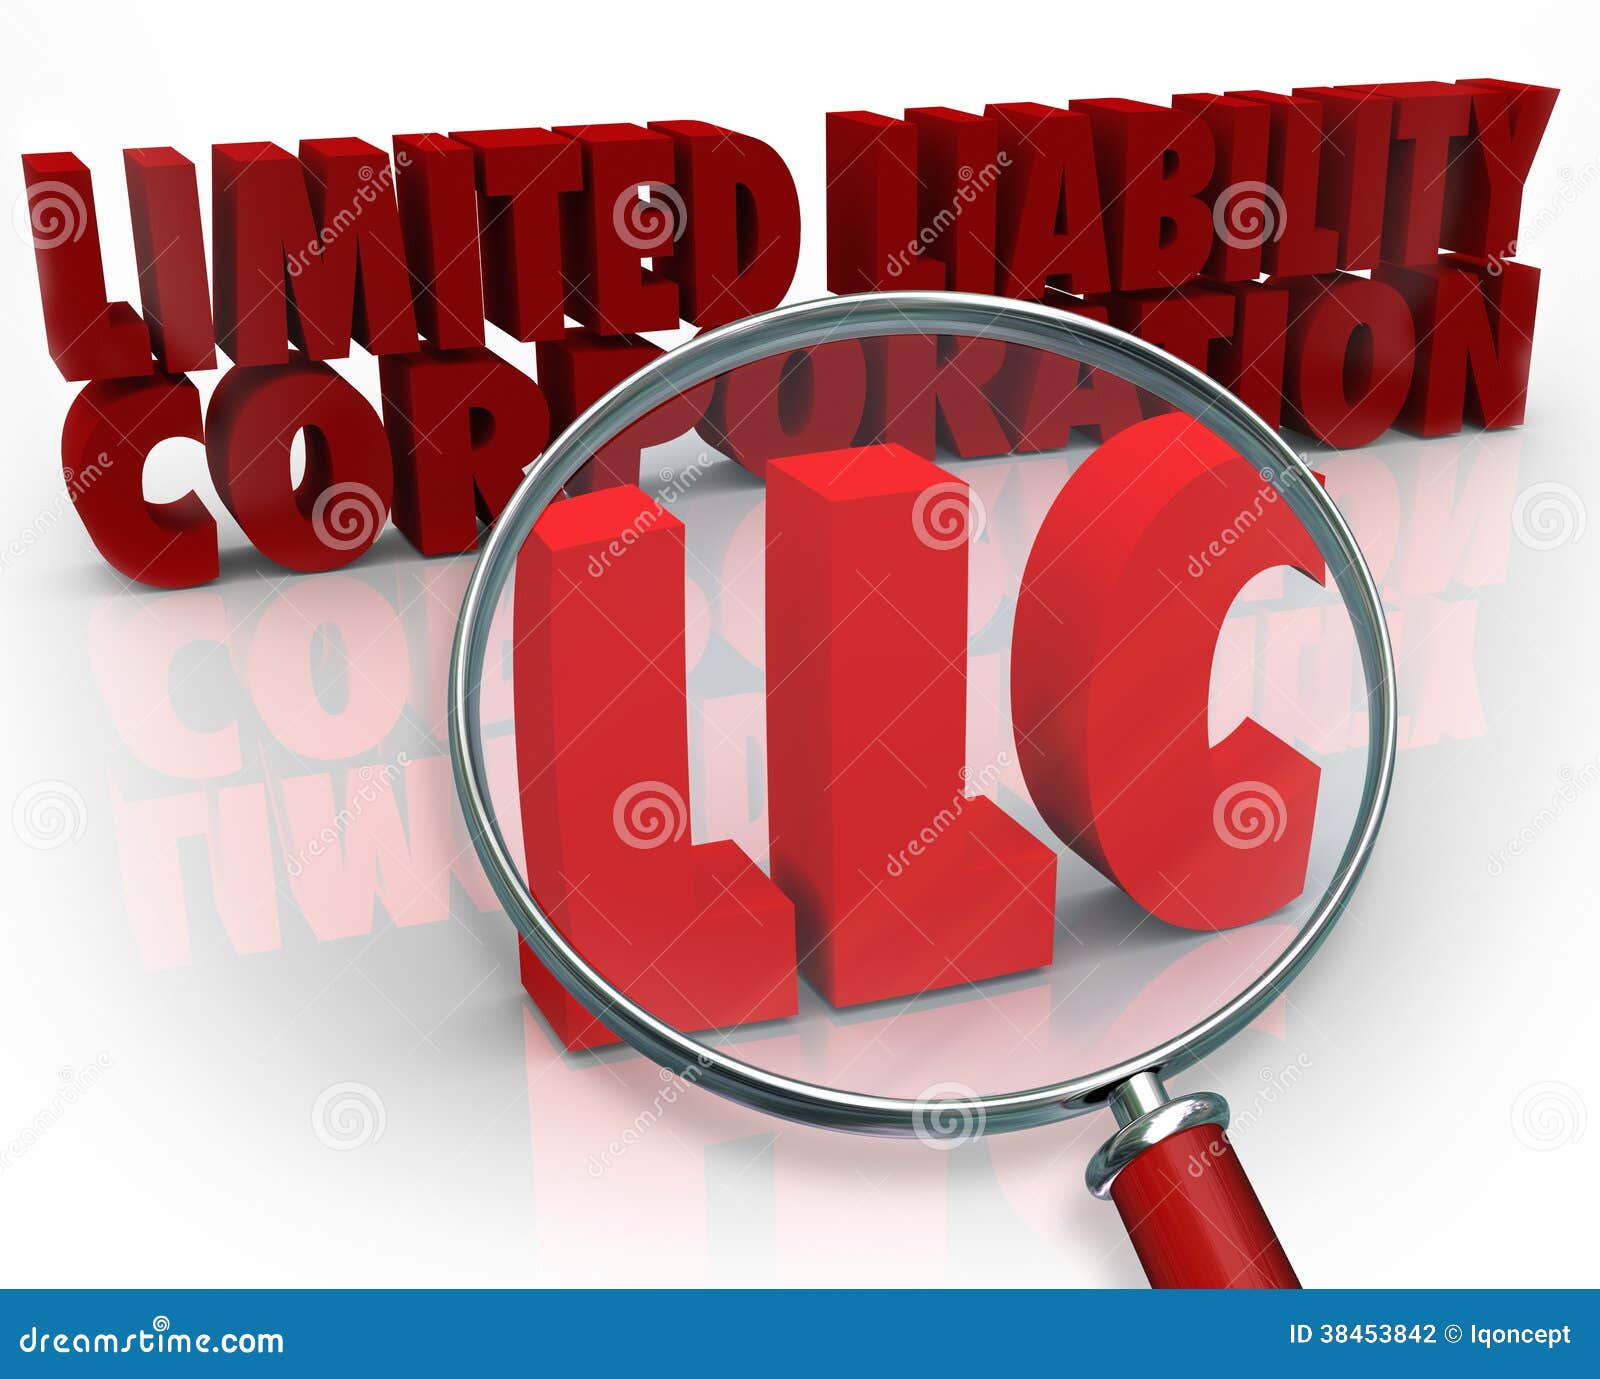 llc magnifying glass limited liability corporation red words